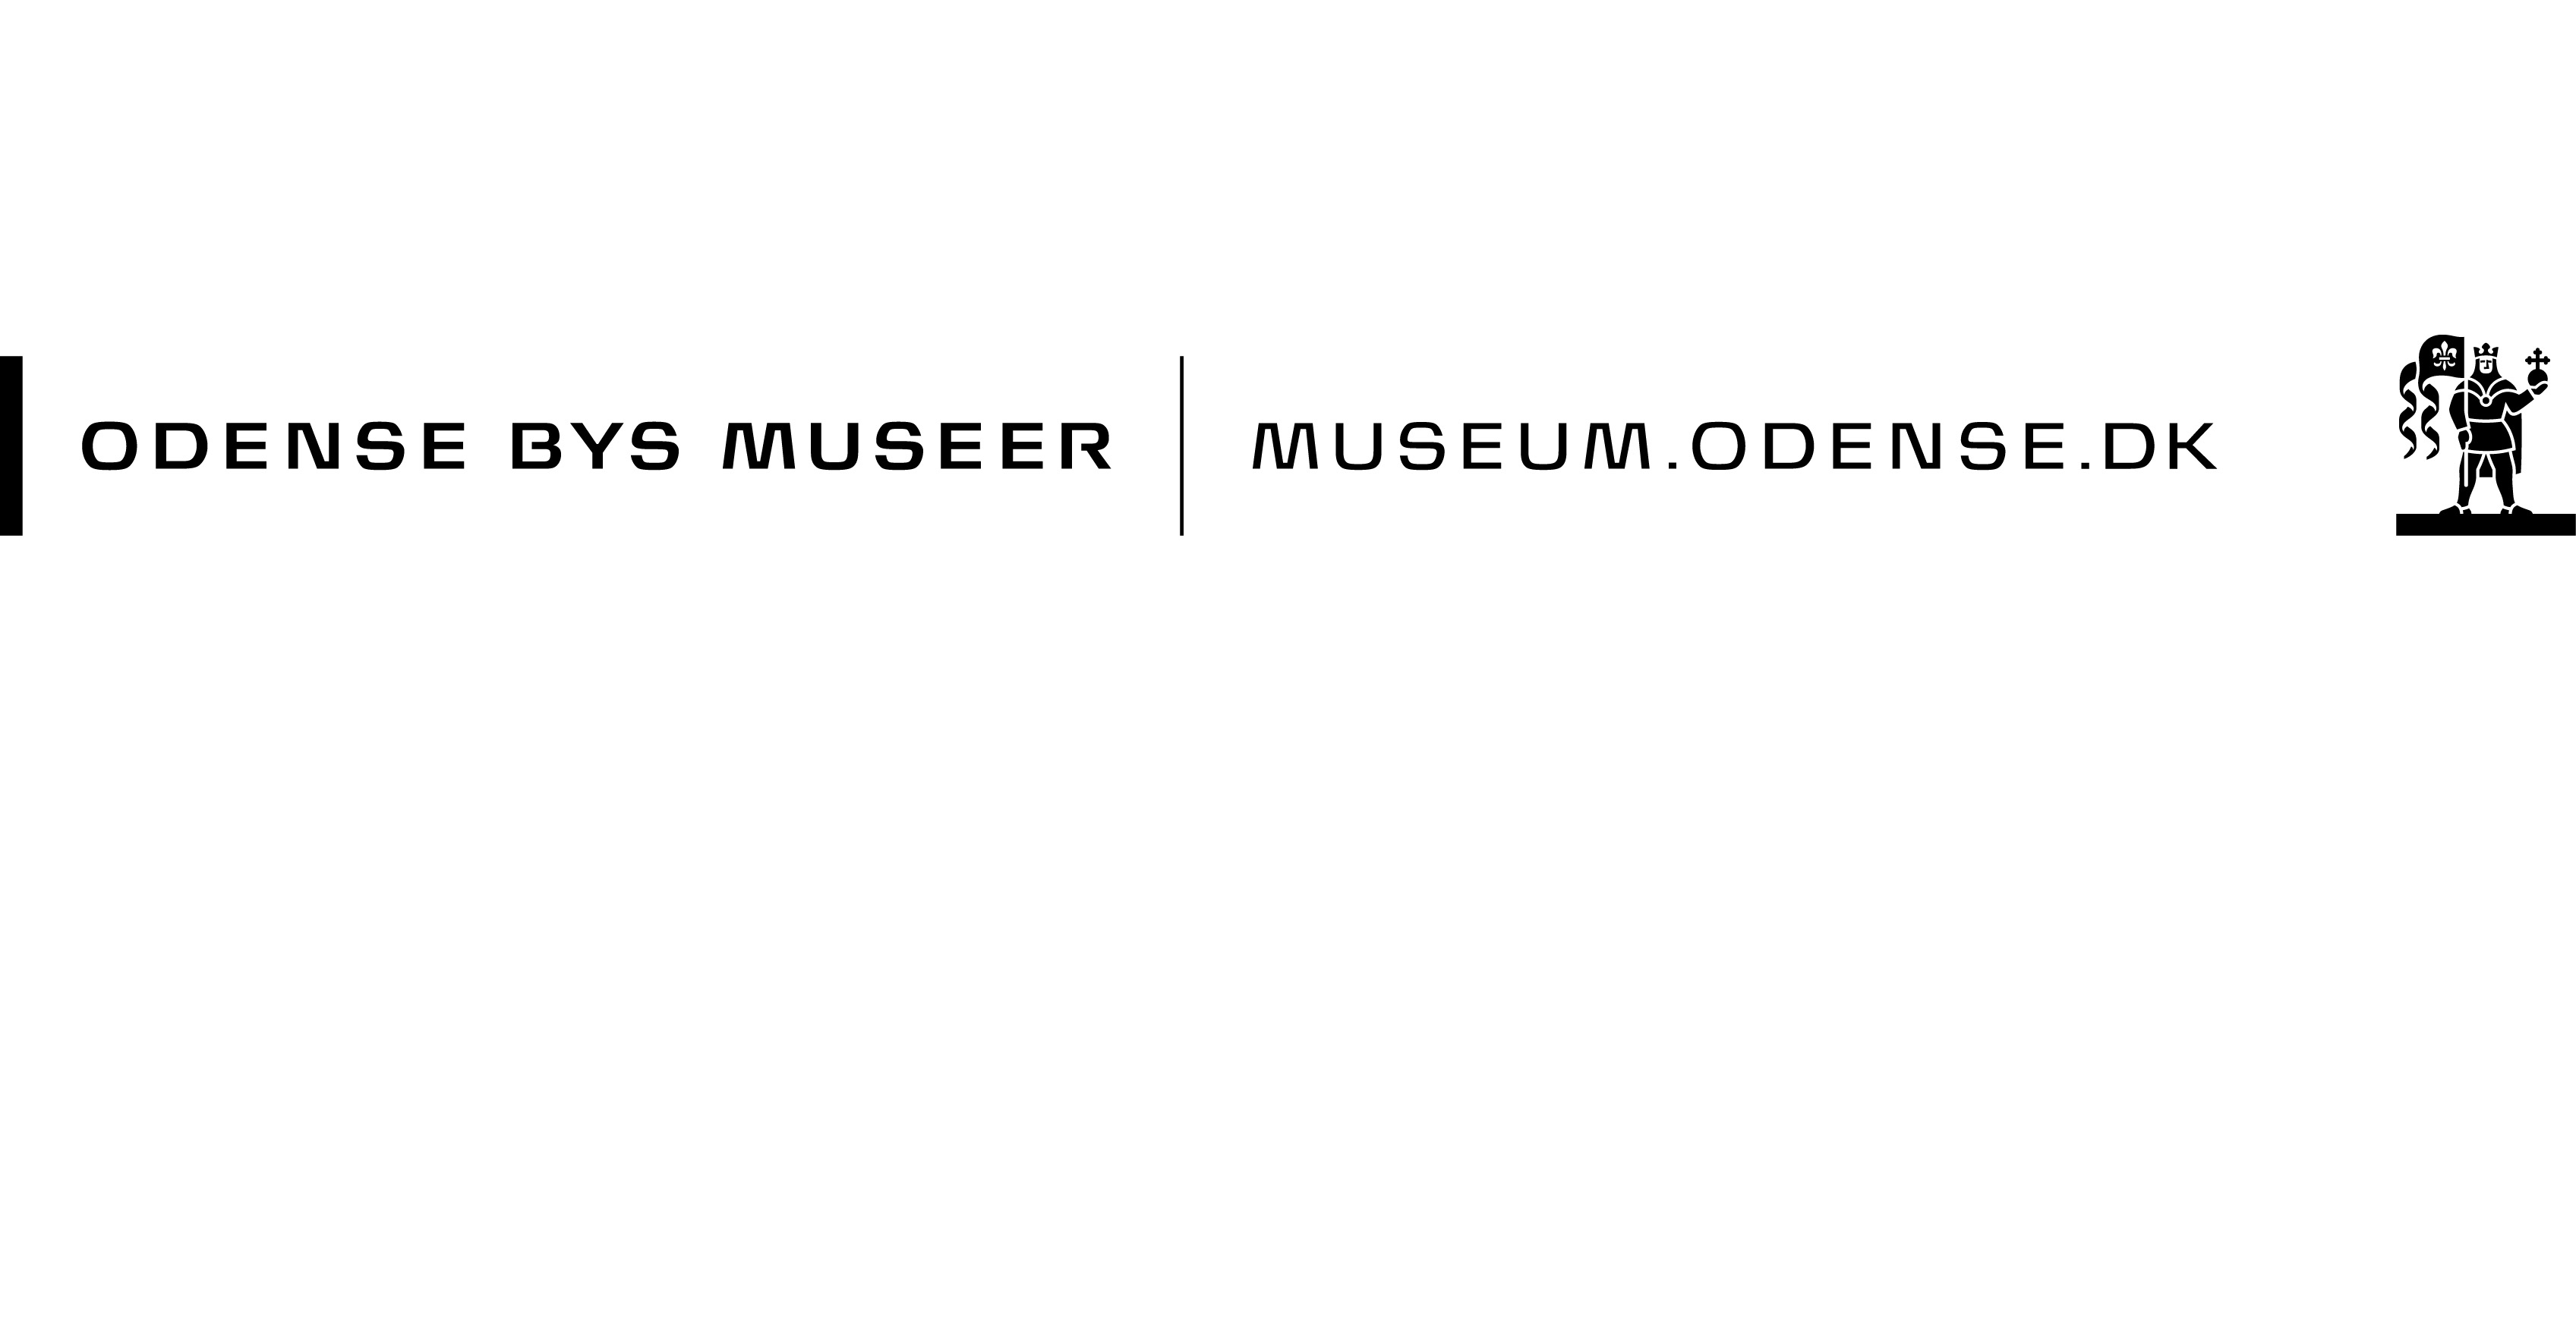 Odense Bys Museer